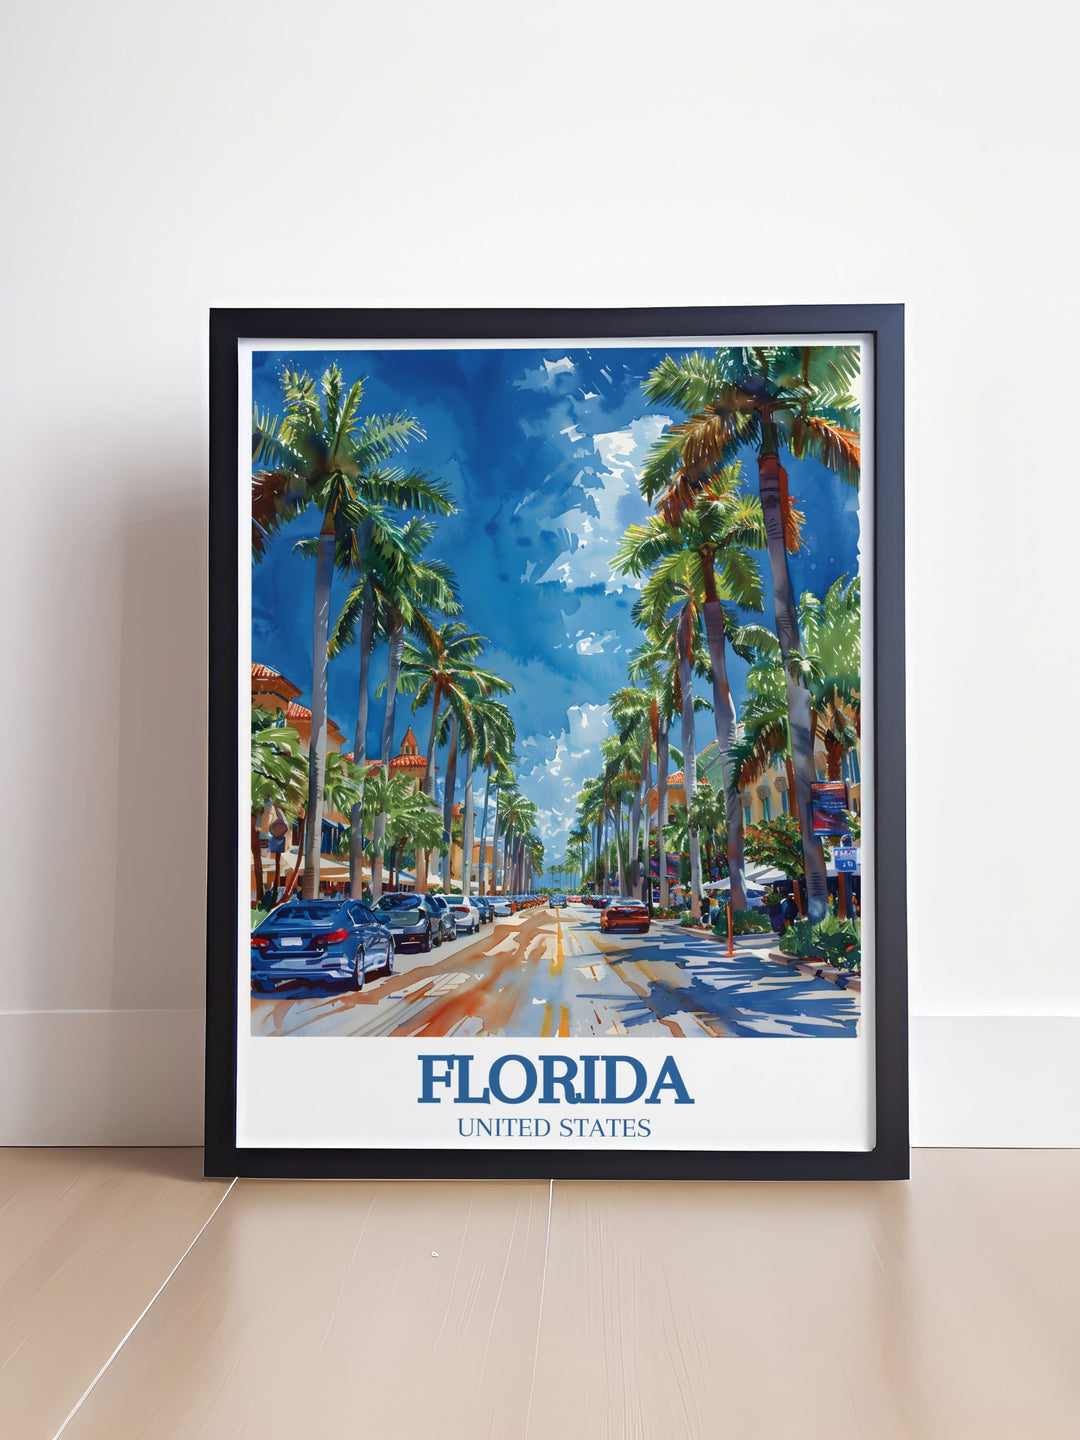 Miami Beachs vibrant nightlife scene is captured in this travel poster, showcasing the citys dynamic energy and colorful lights.